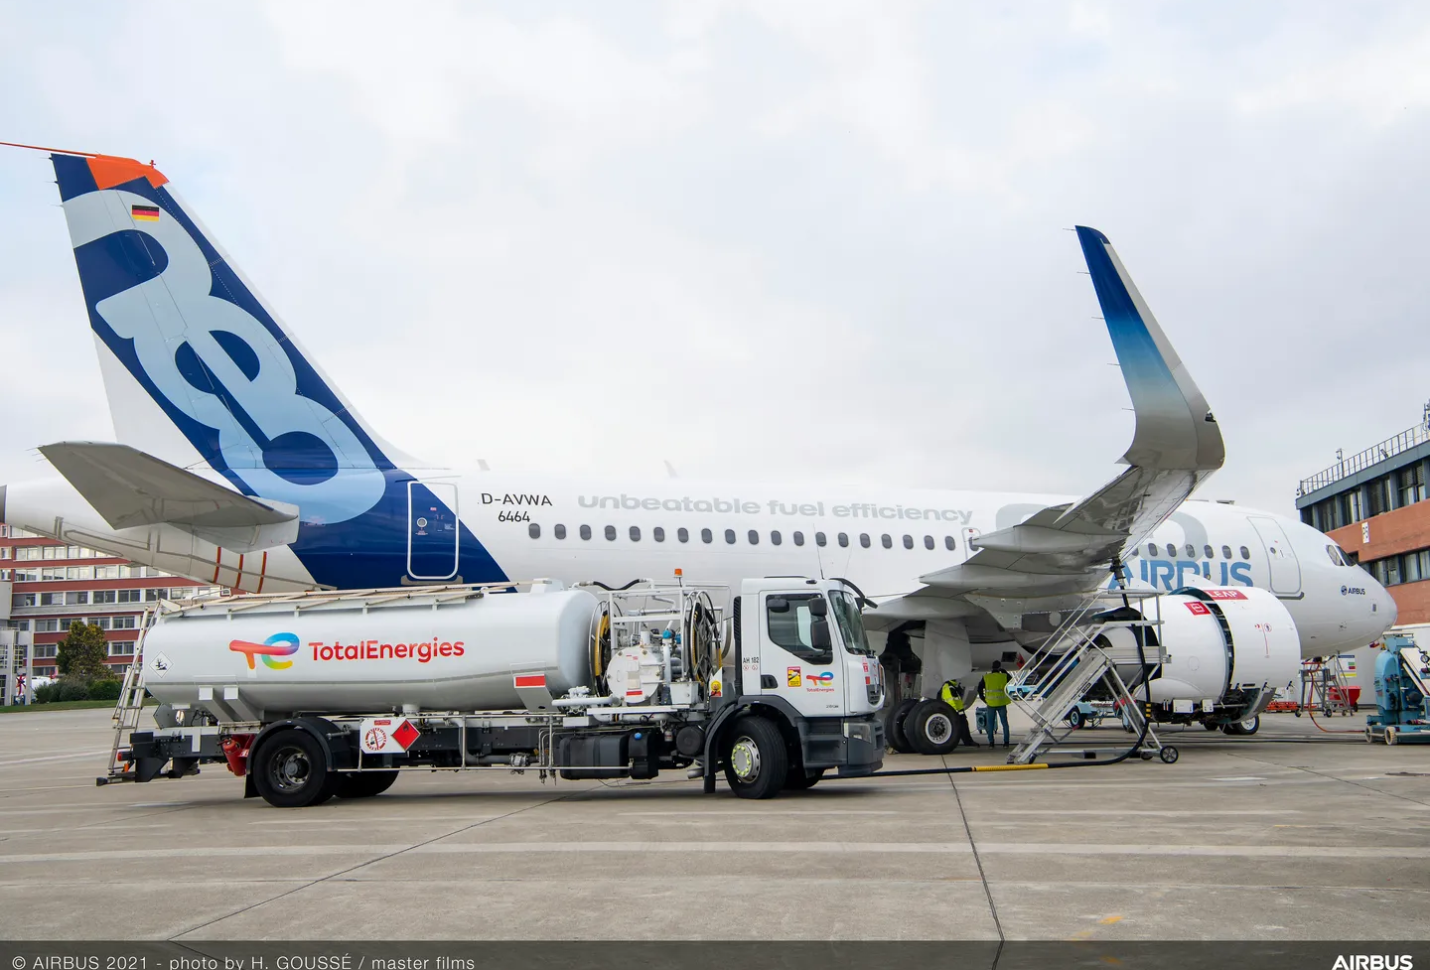 Airbus, TotalEnergies partner for decarbonizing aviation using SAF